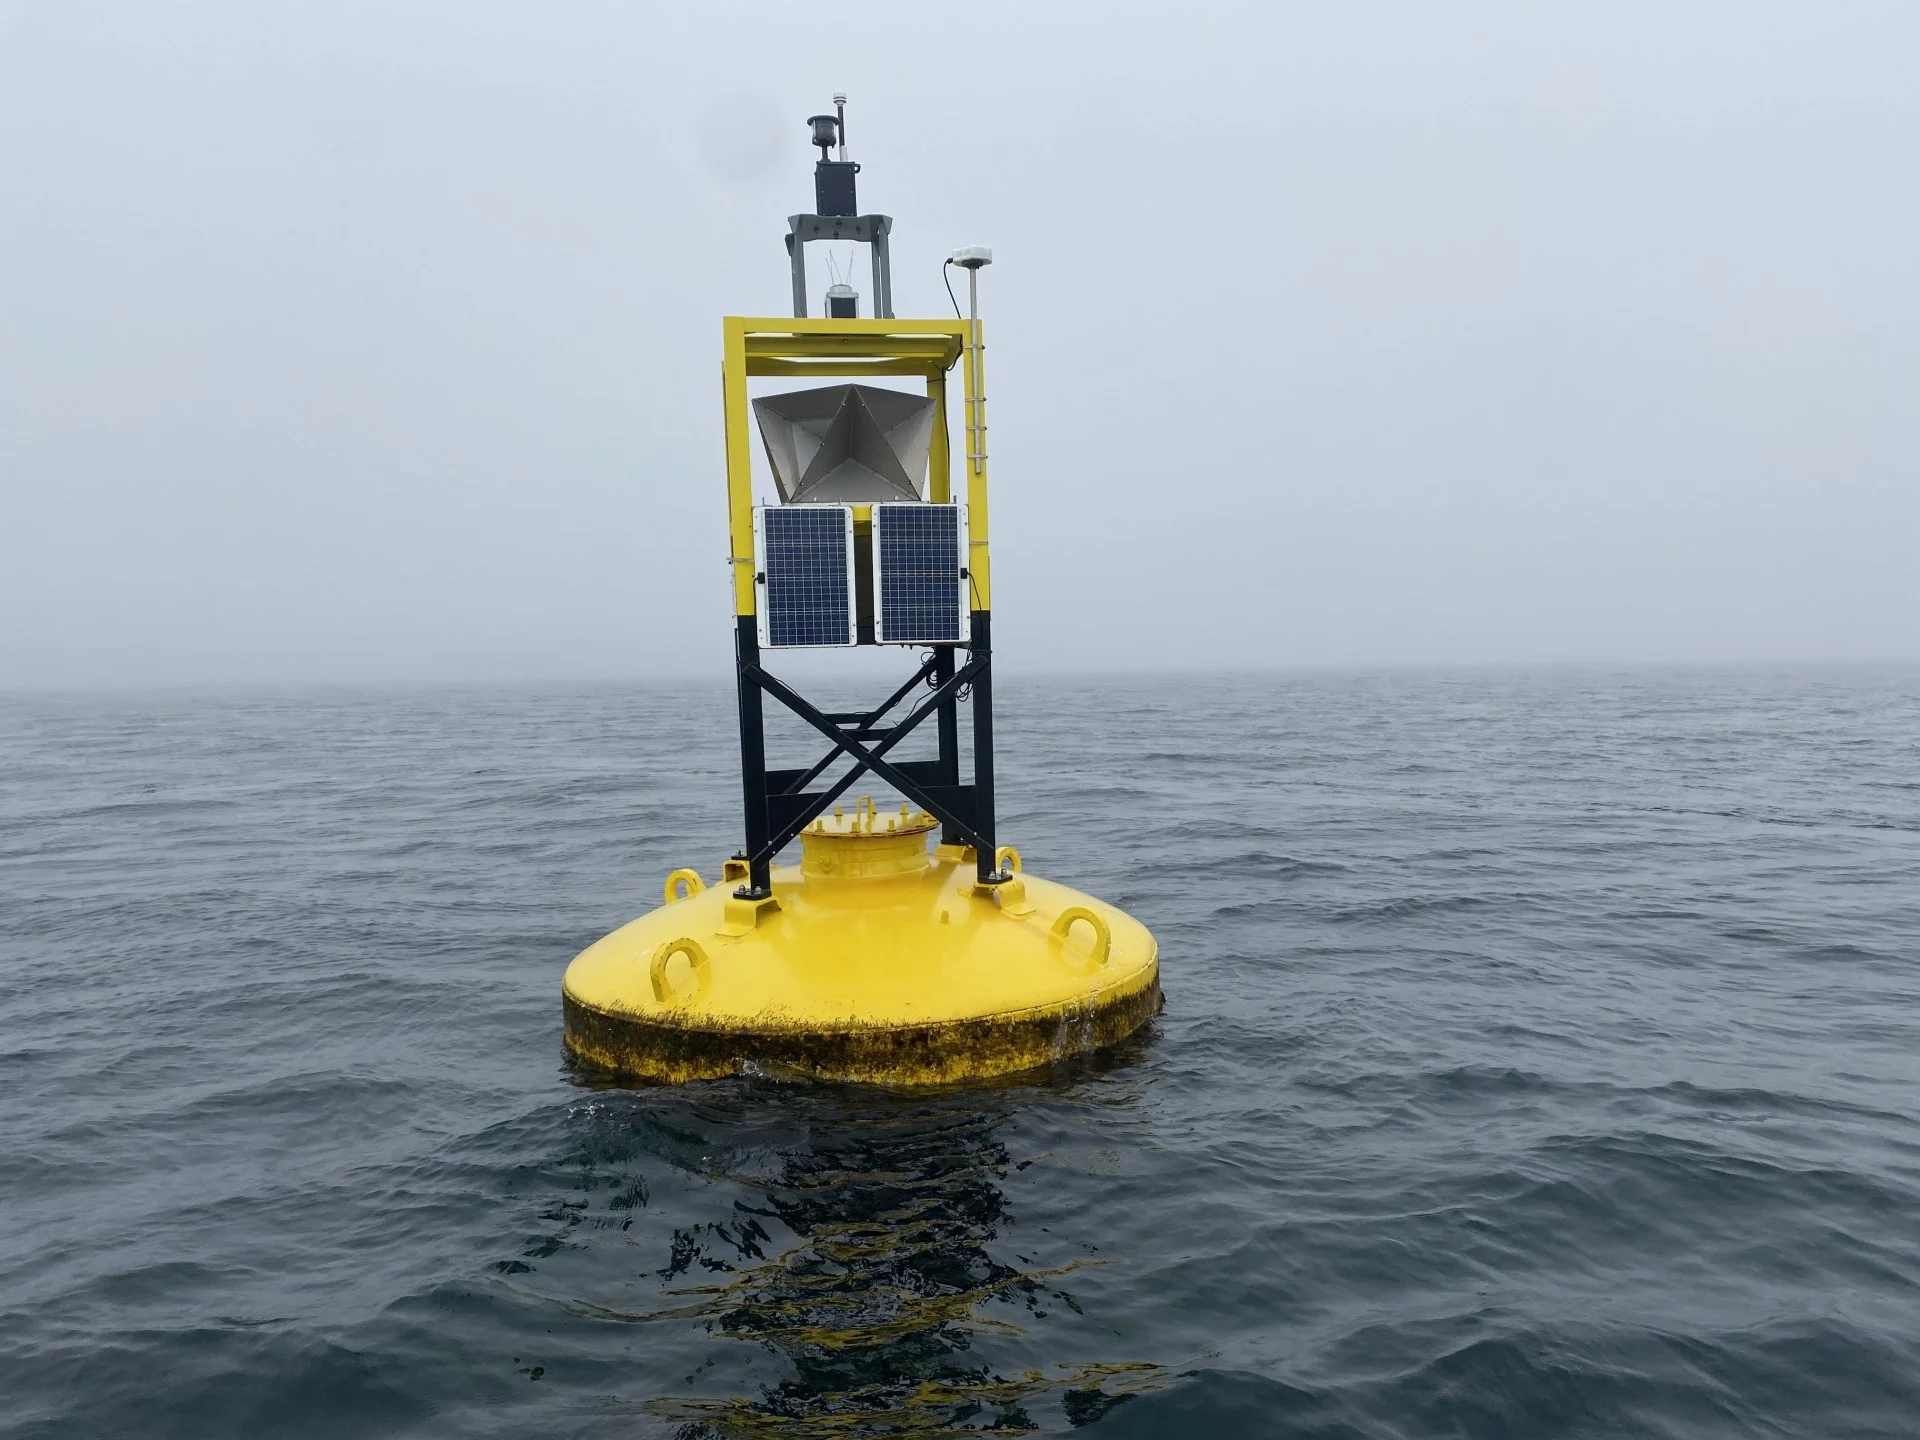 Not your average buoy: Why these data hubs are being placed in Canadian waters